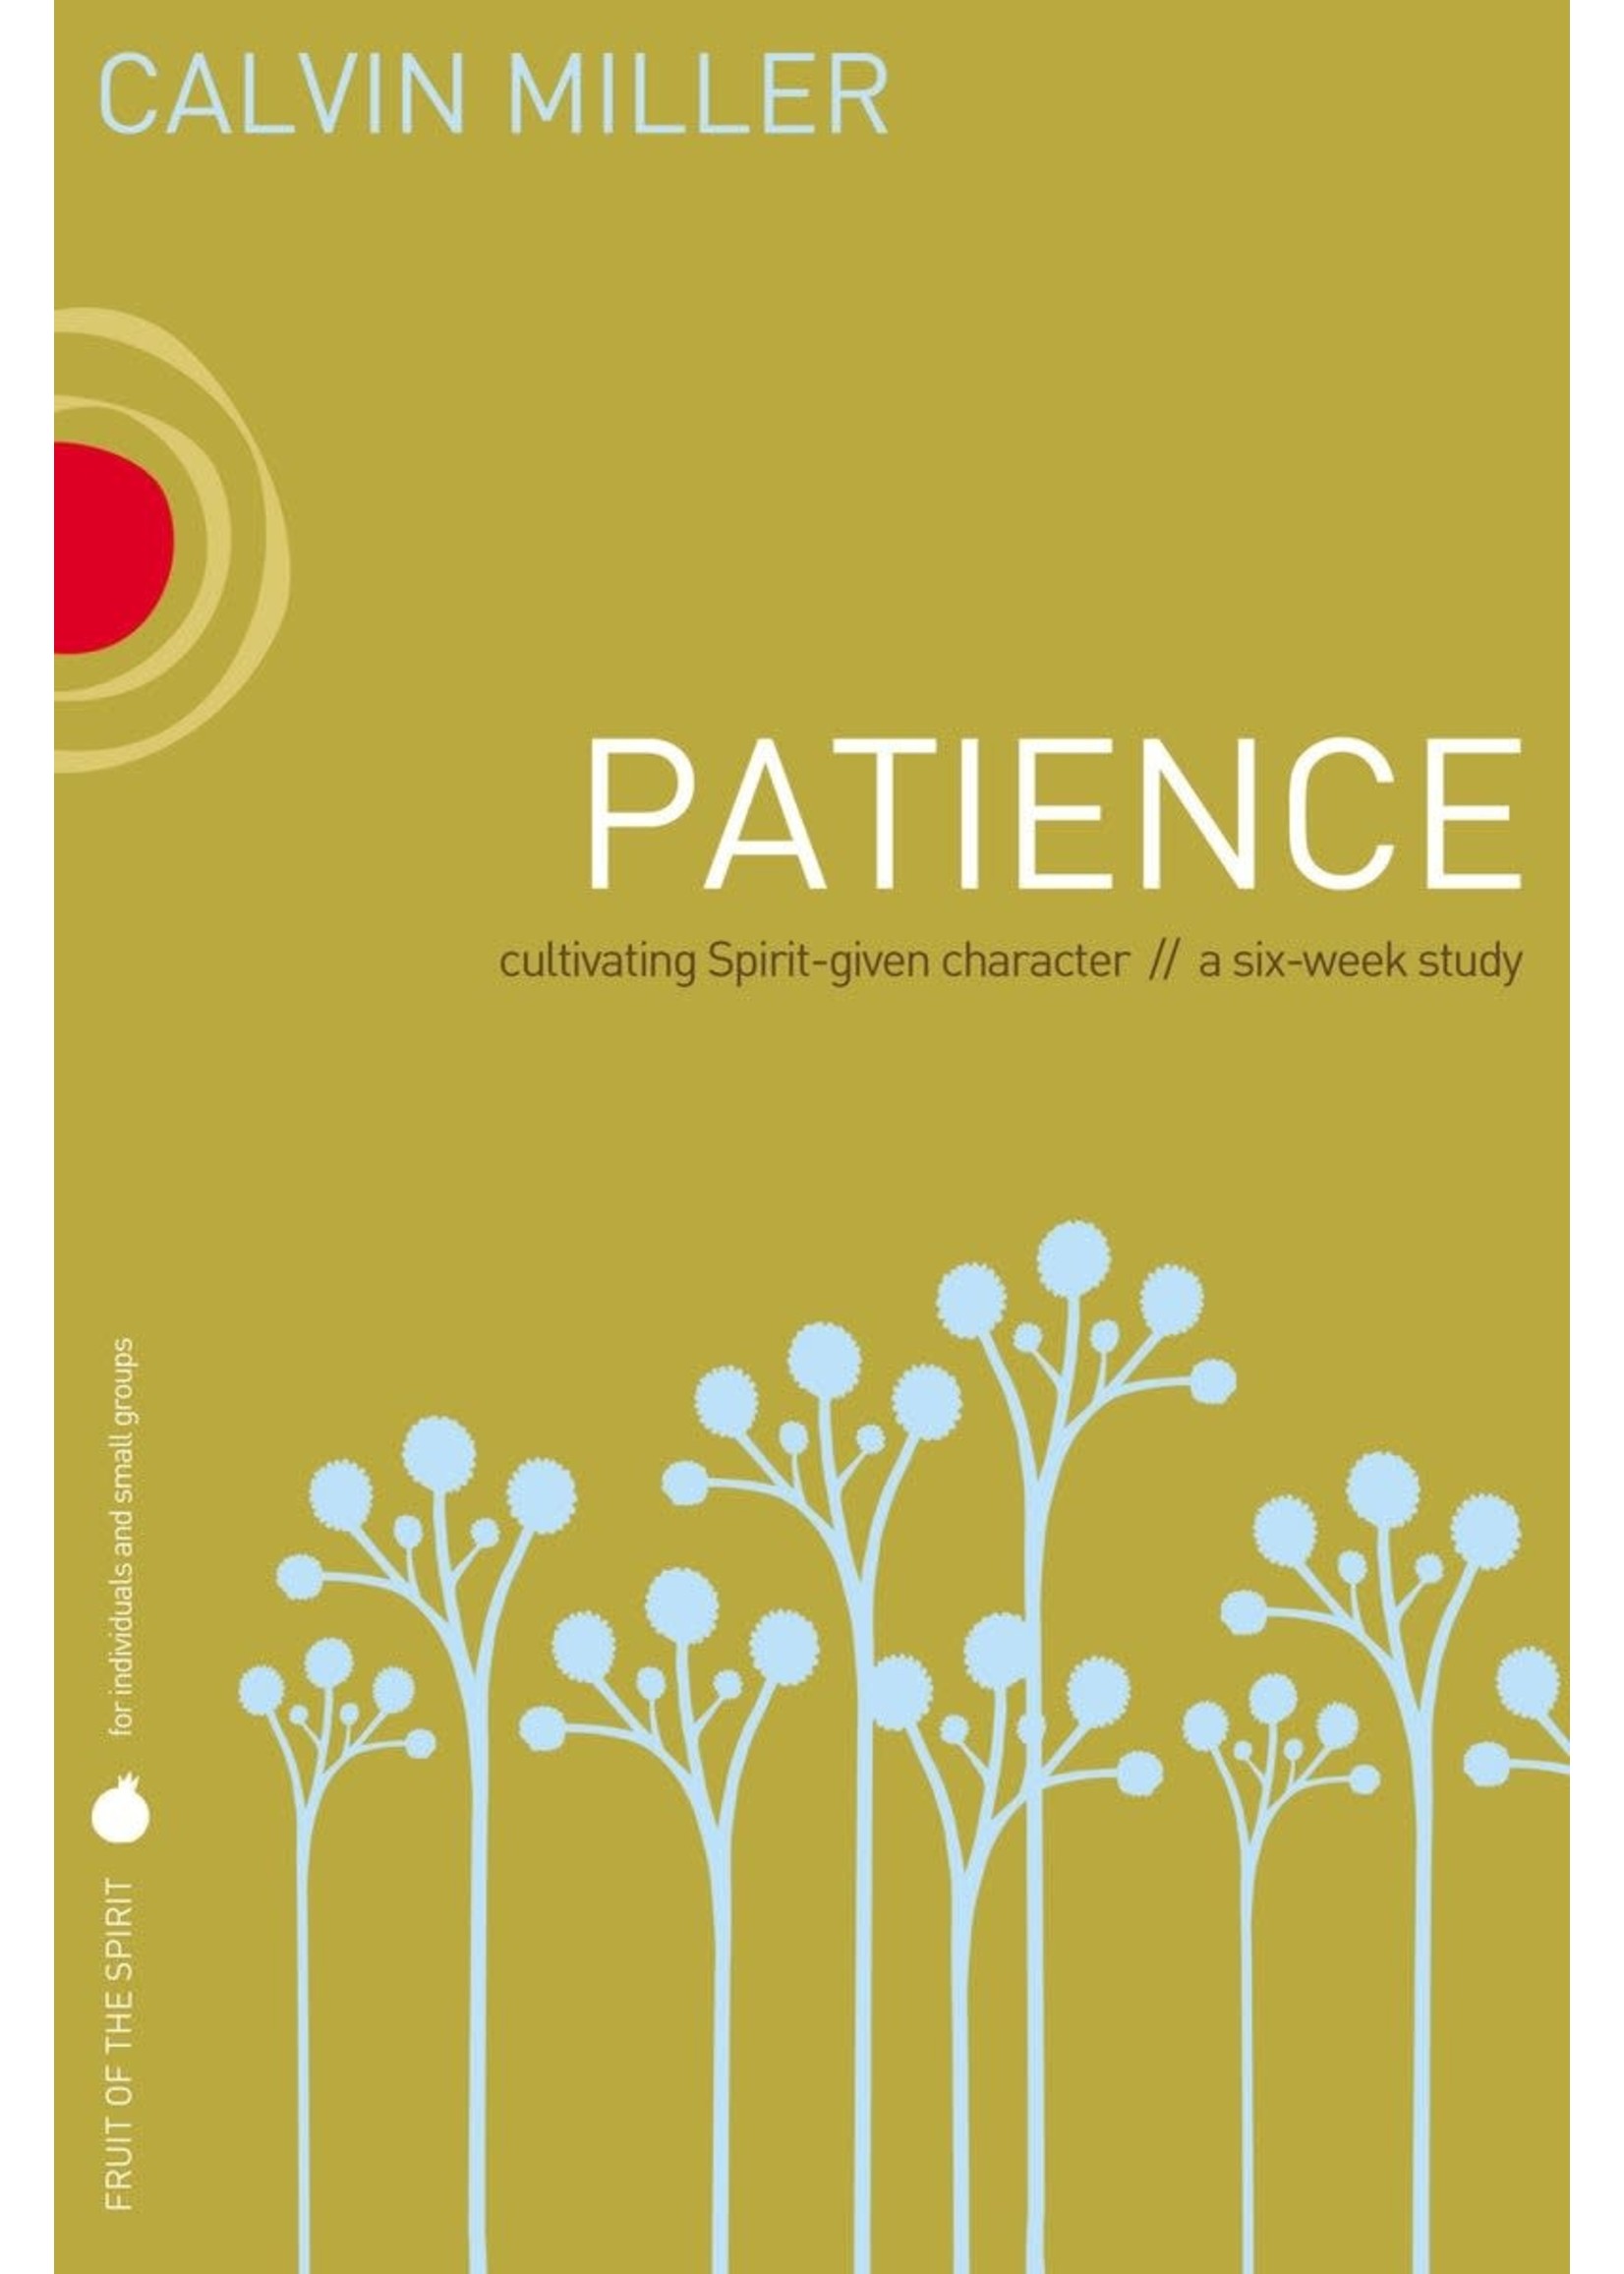 Fruit of the Spirit - PATIENCE